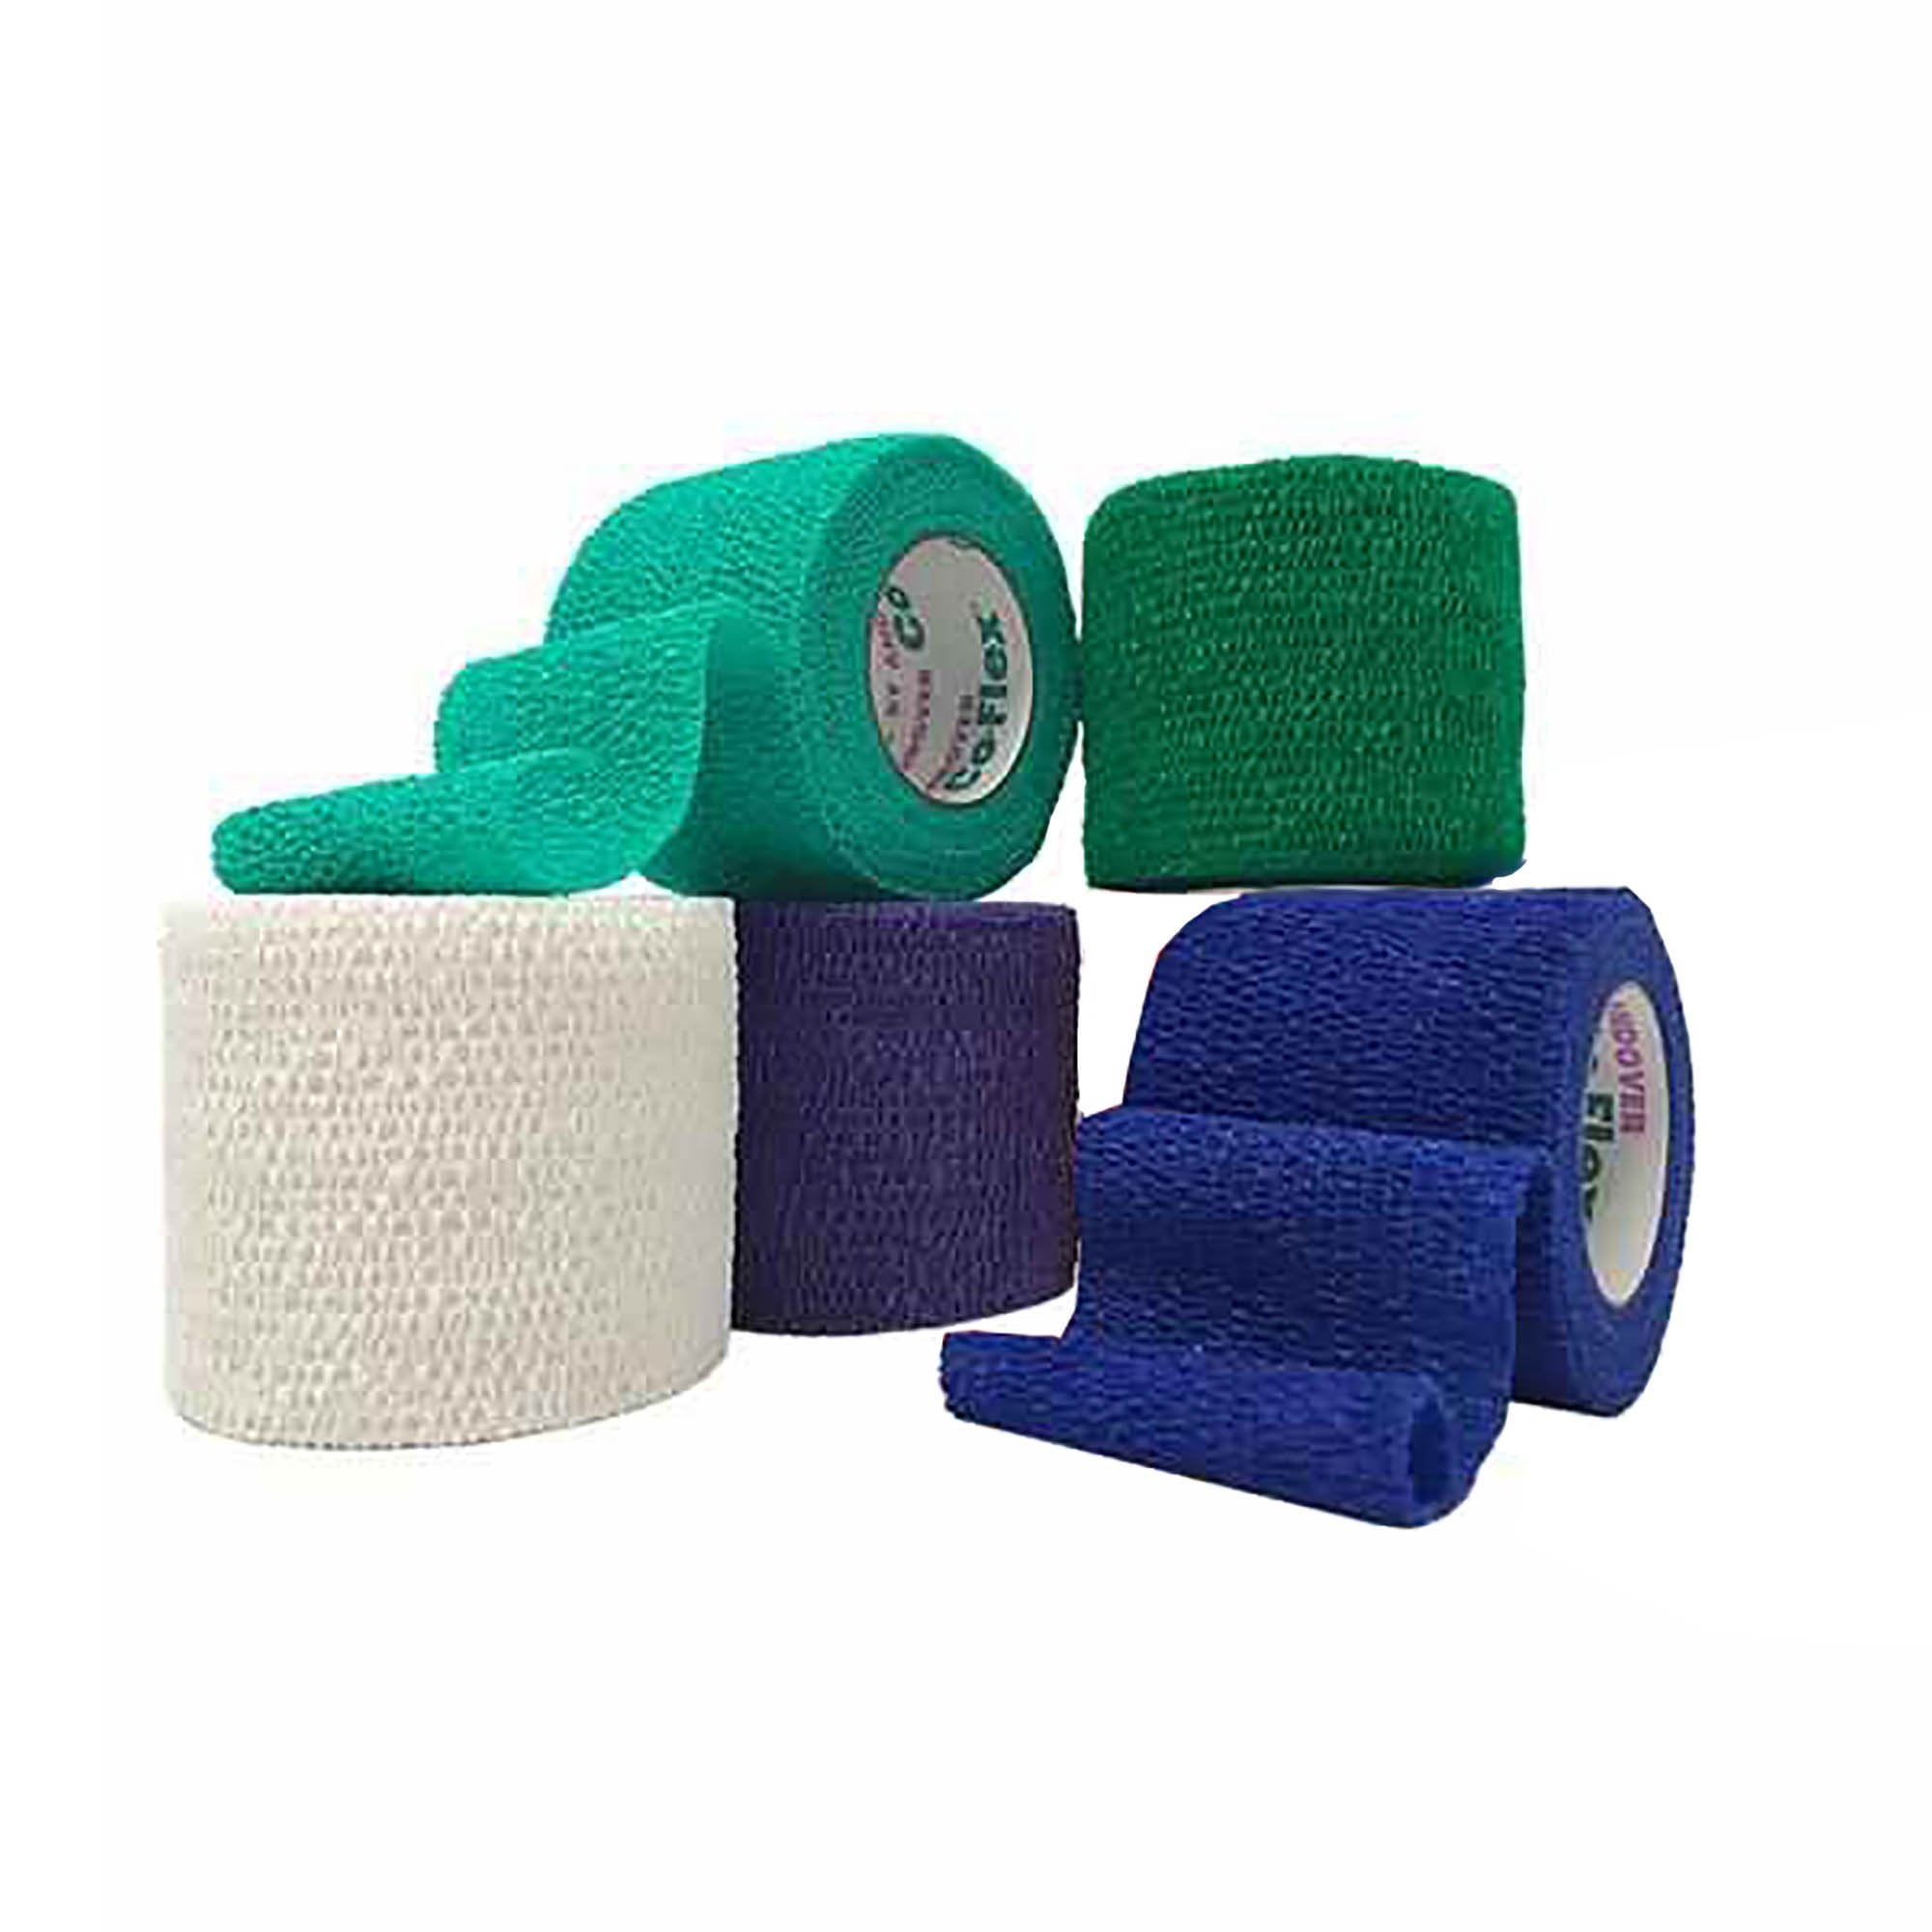 Assorted and Camouflage Colors Vet Wrap Tape Bulk 6, 12, 18, or 24 Pack 2, 3, or 4 Inches wide Vet Rap Medical First Aid Tape Self Adhesive Adherent for Ankle Wrist Sprains and Swelling 